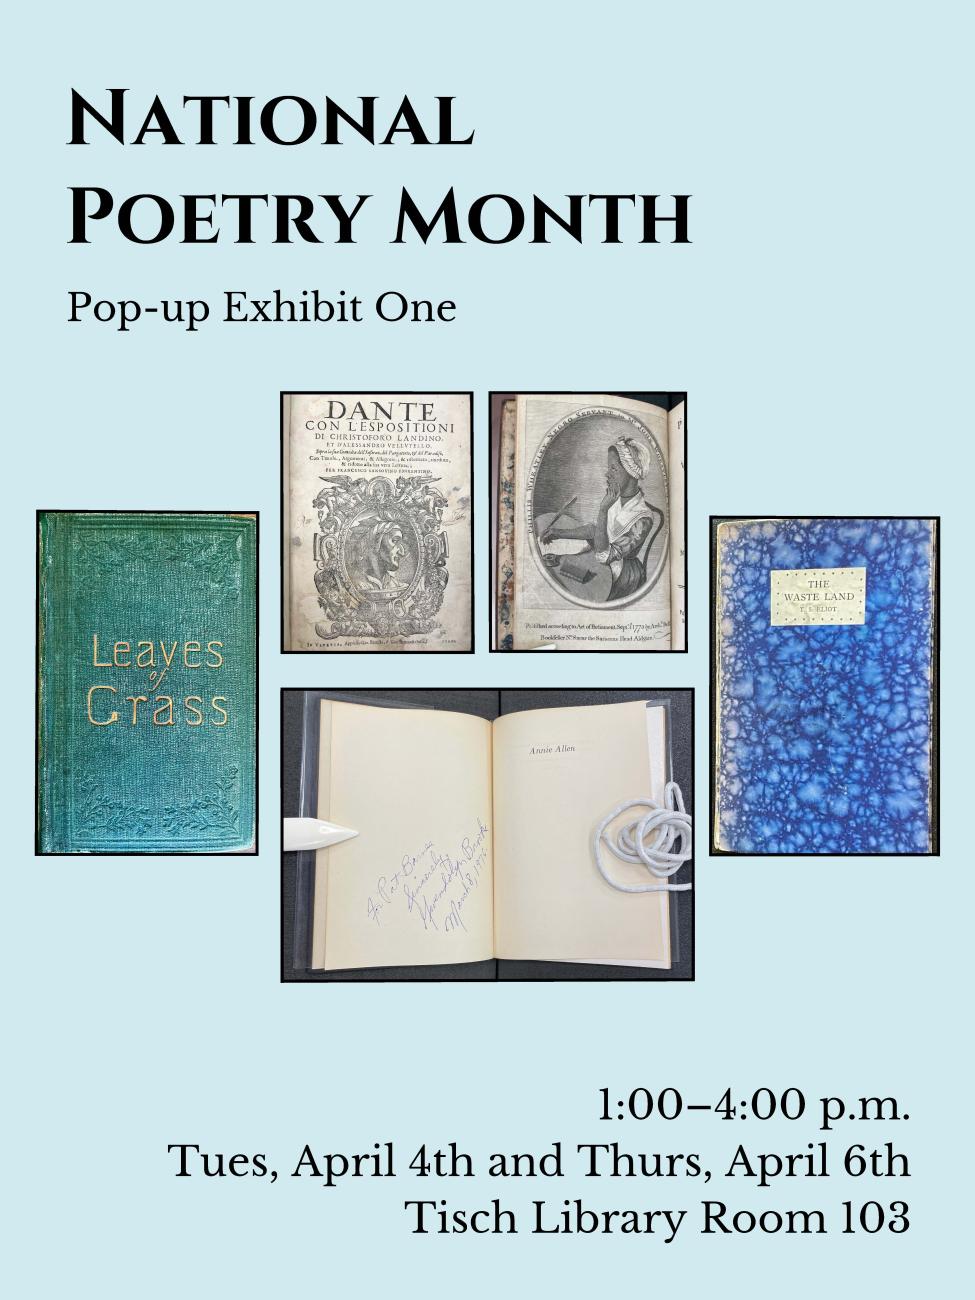 National Poetry Month: Pop-up Exhibit One on Tuesday, April 4th and Thursday, April 6th at 1:00-4:00 PM in Tisch Library Room 103